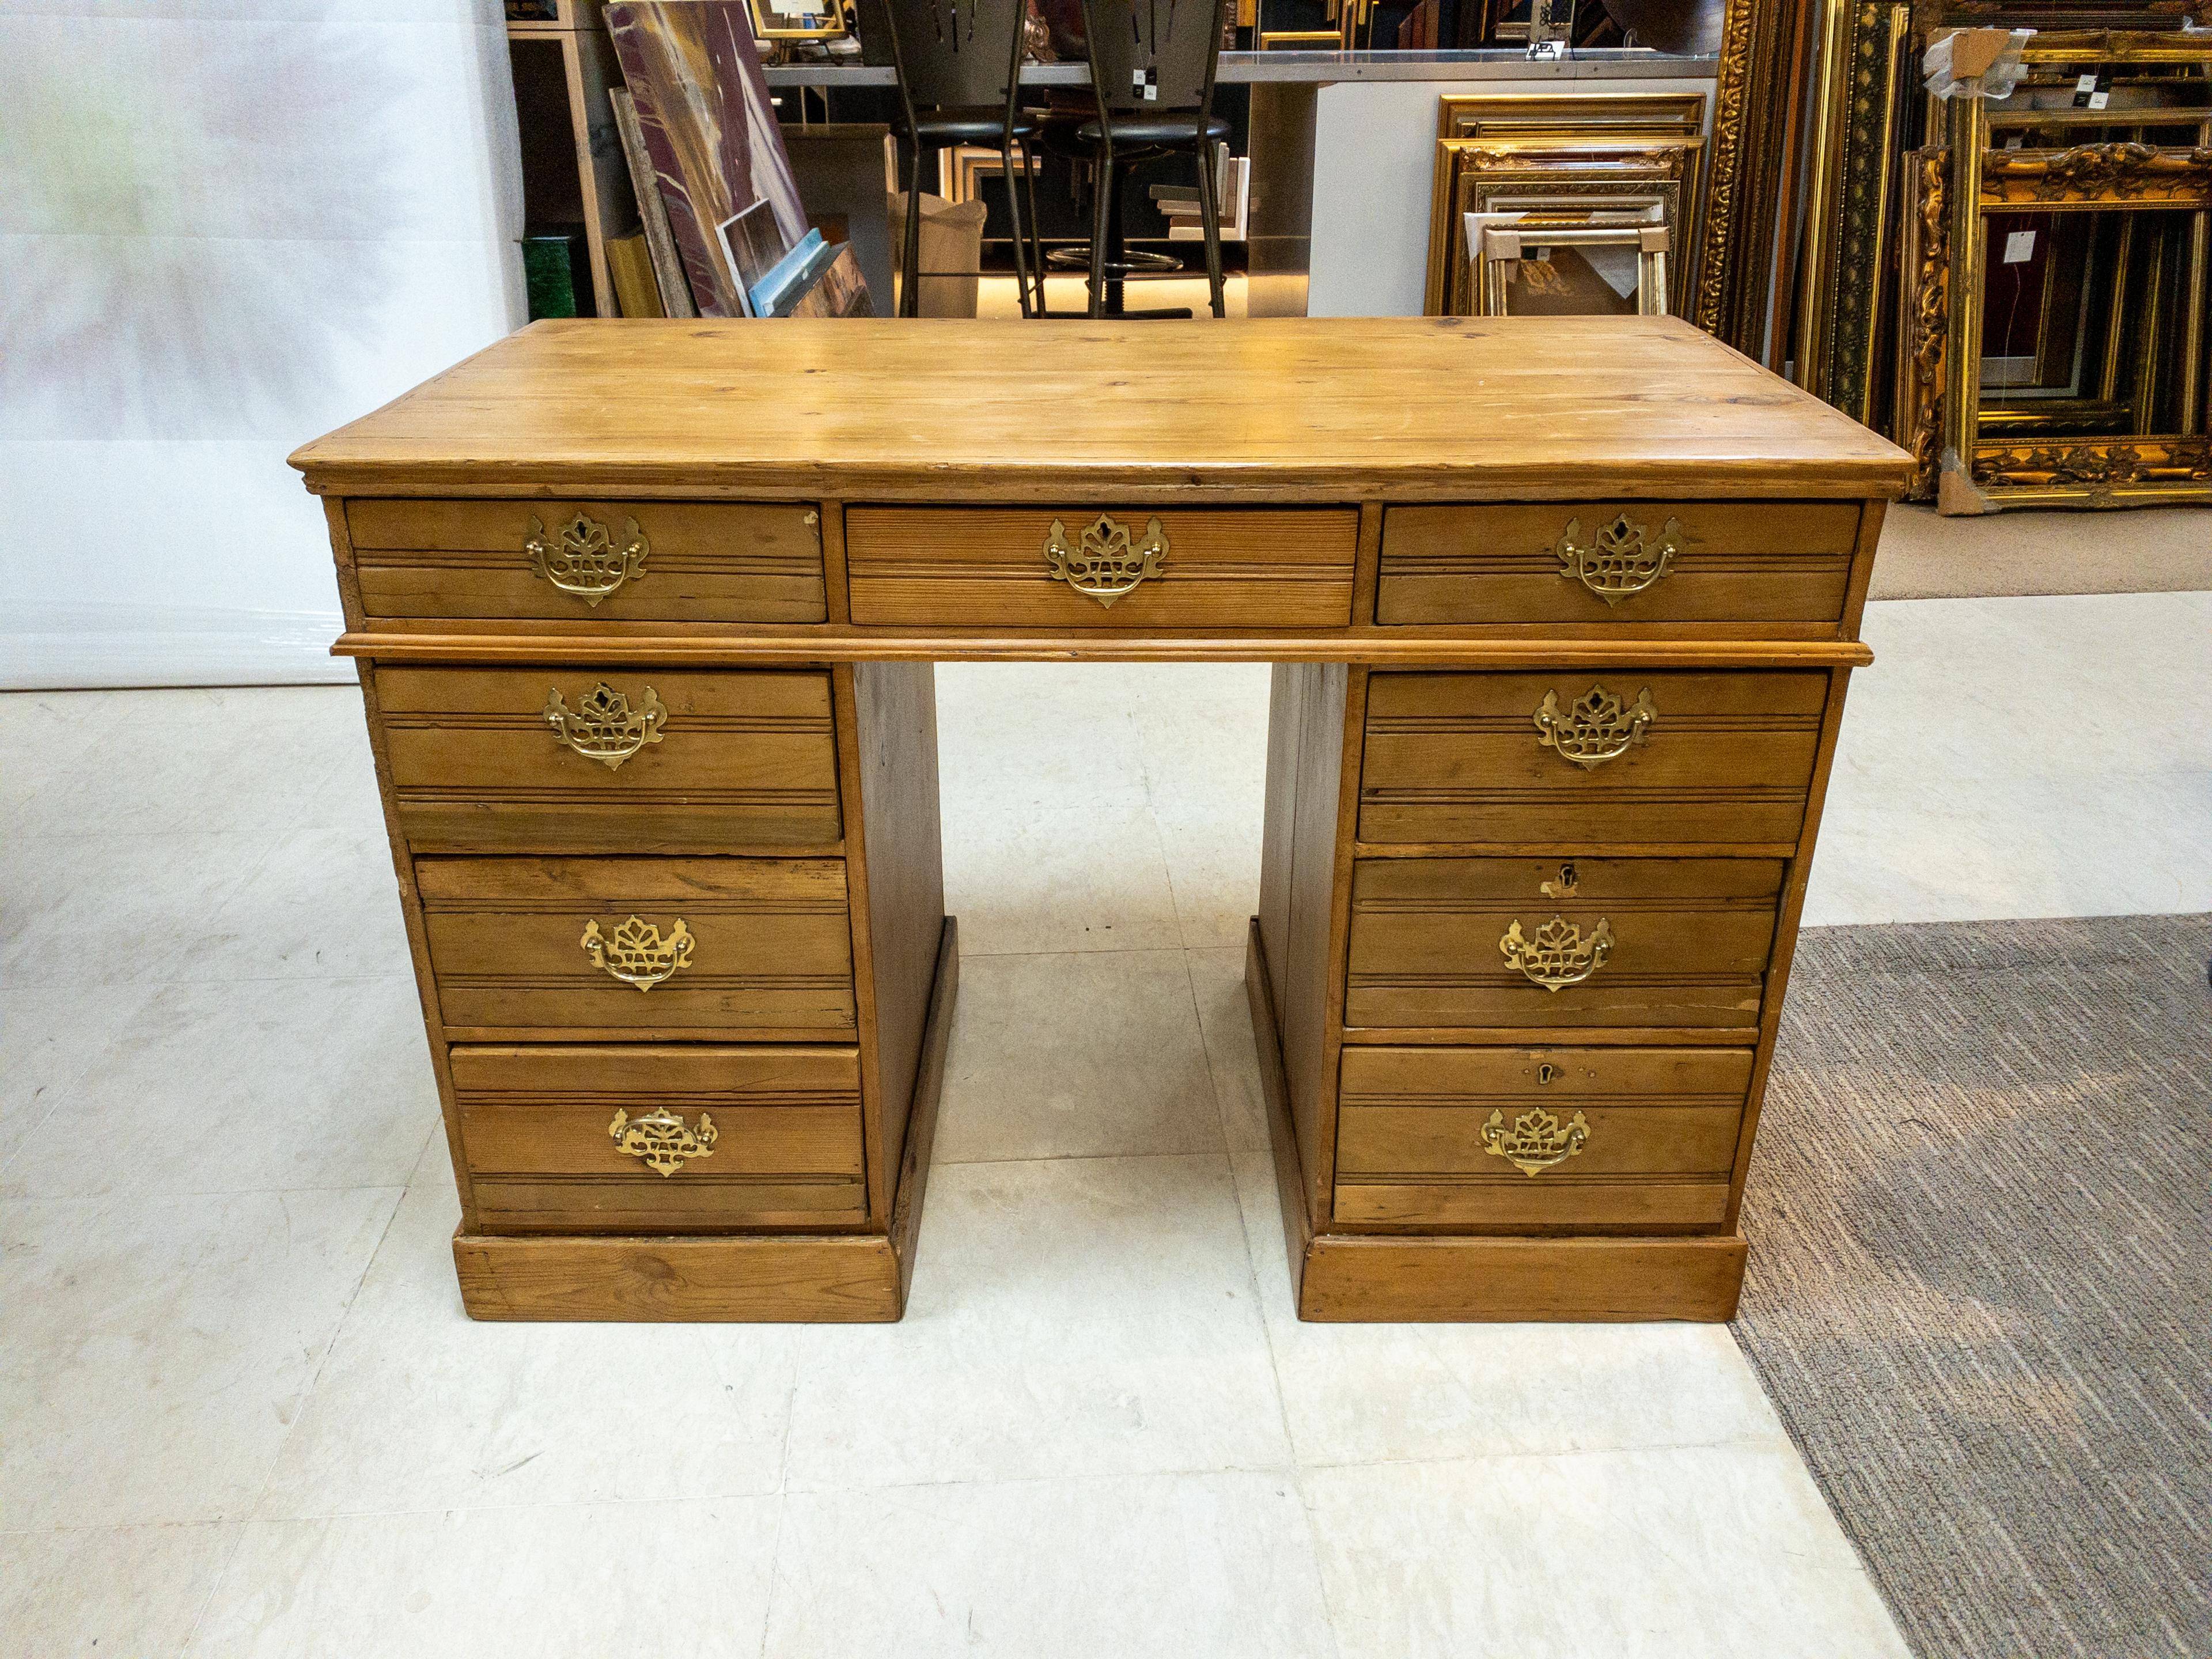 The 1920s English Pine Desk exudes timeless charm with its elegant craftsmanship and functional design. Constructed from rich, solid pine, it boasts a warm, inviting hue that adds character to any workspace or study. Standing proud with its sturdy